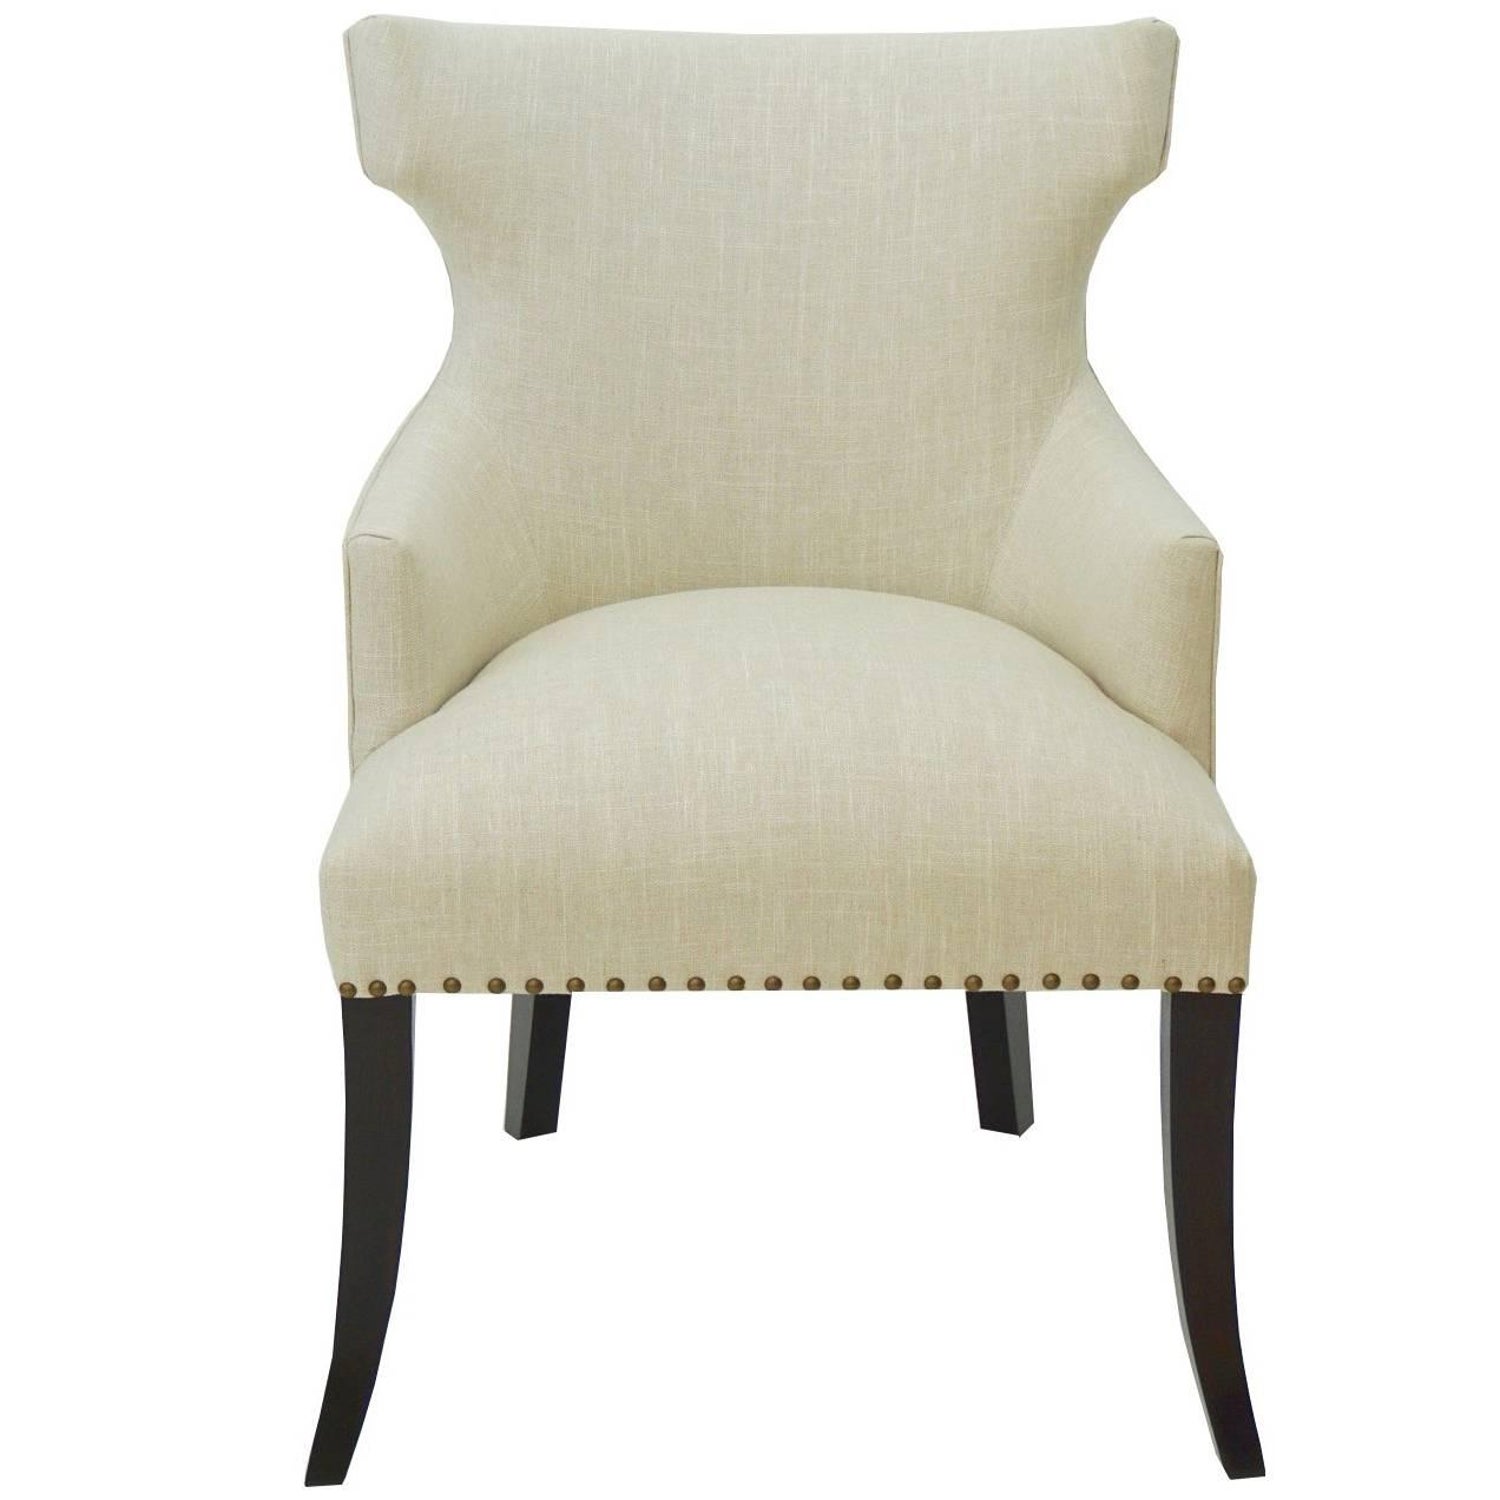 Custom Dining Room Chair With Hourglass, Custom Dining Room Chairs Upholstered